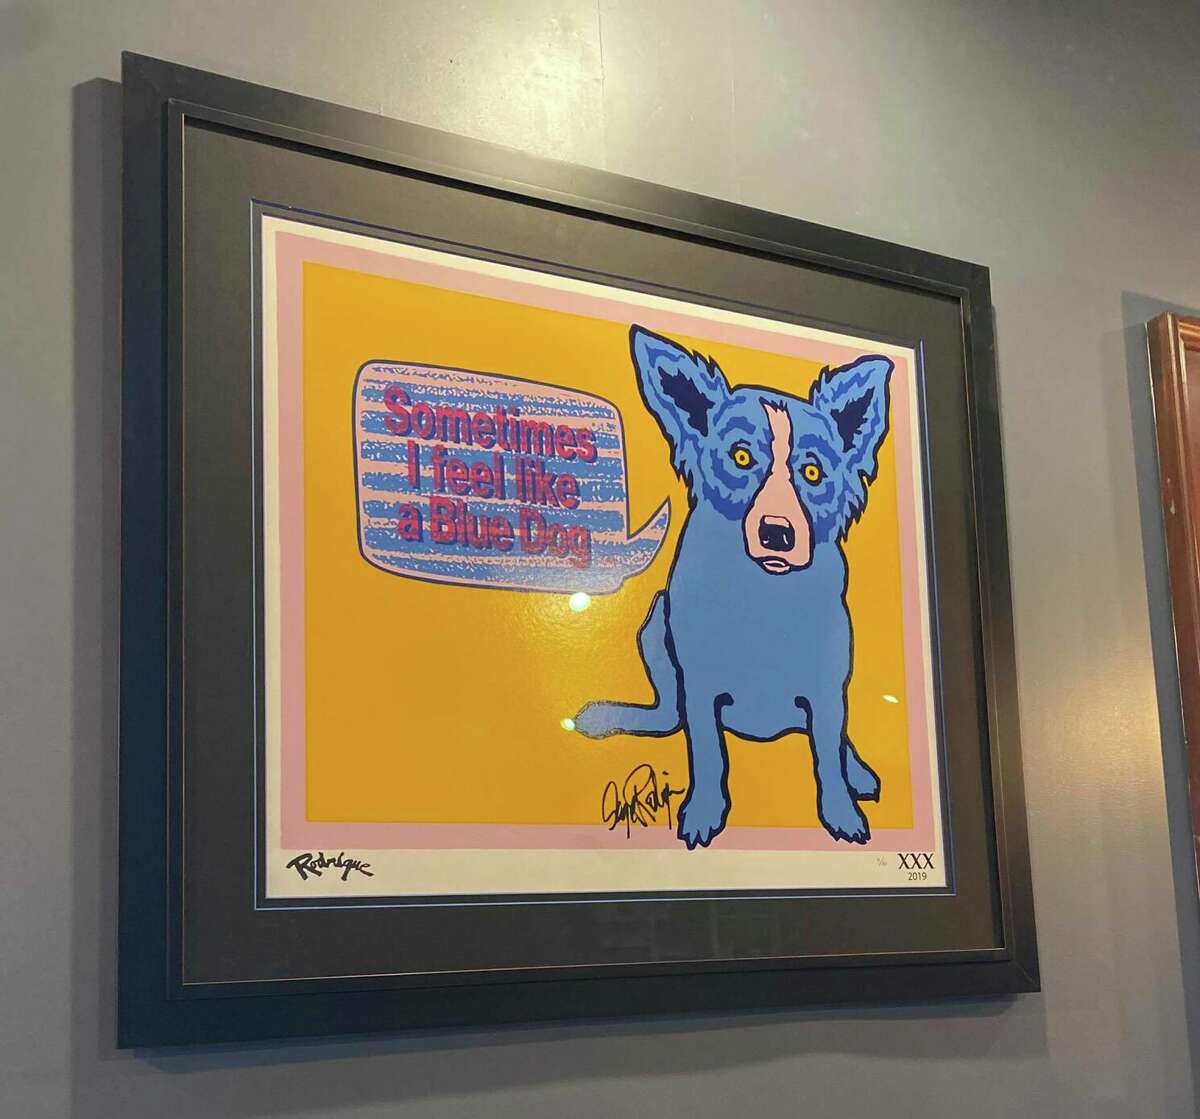 At Roux, a “Blue Dog” portrait by Louisiana artist George Rodrigue hangs on the wall, based on the Cajun legend of the loup-garou, a mythical werewolf-like creature.